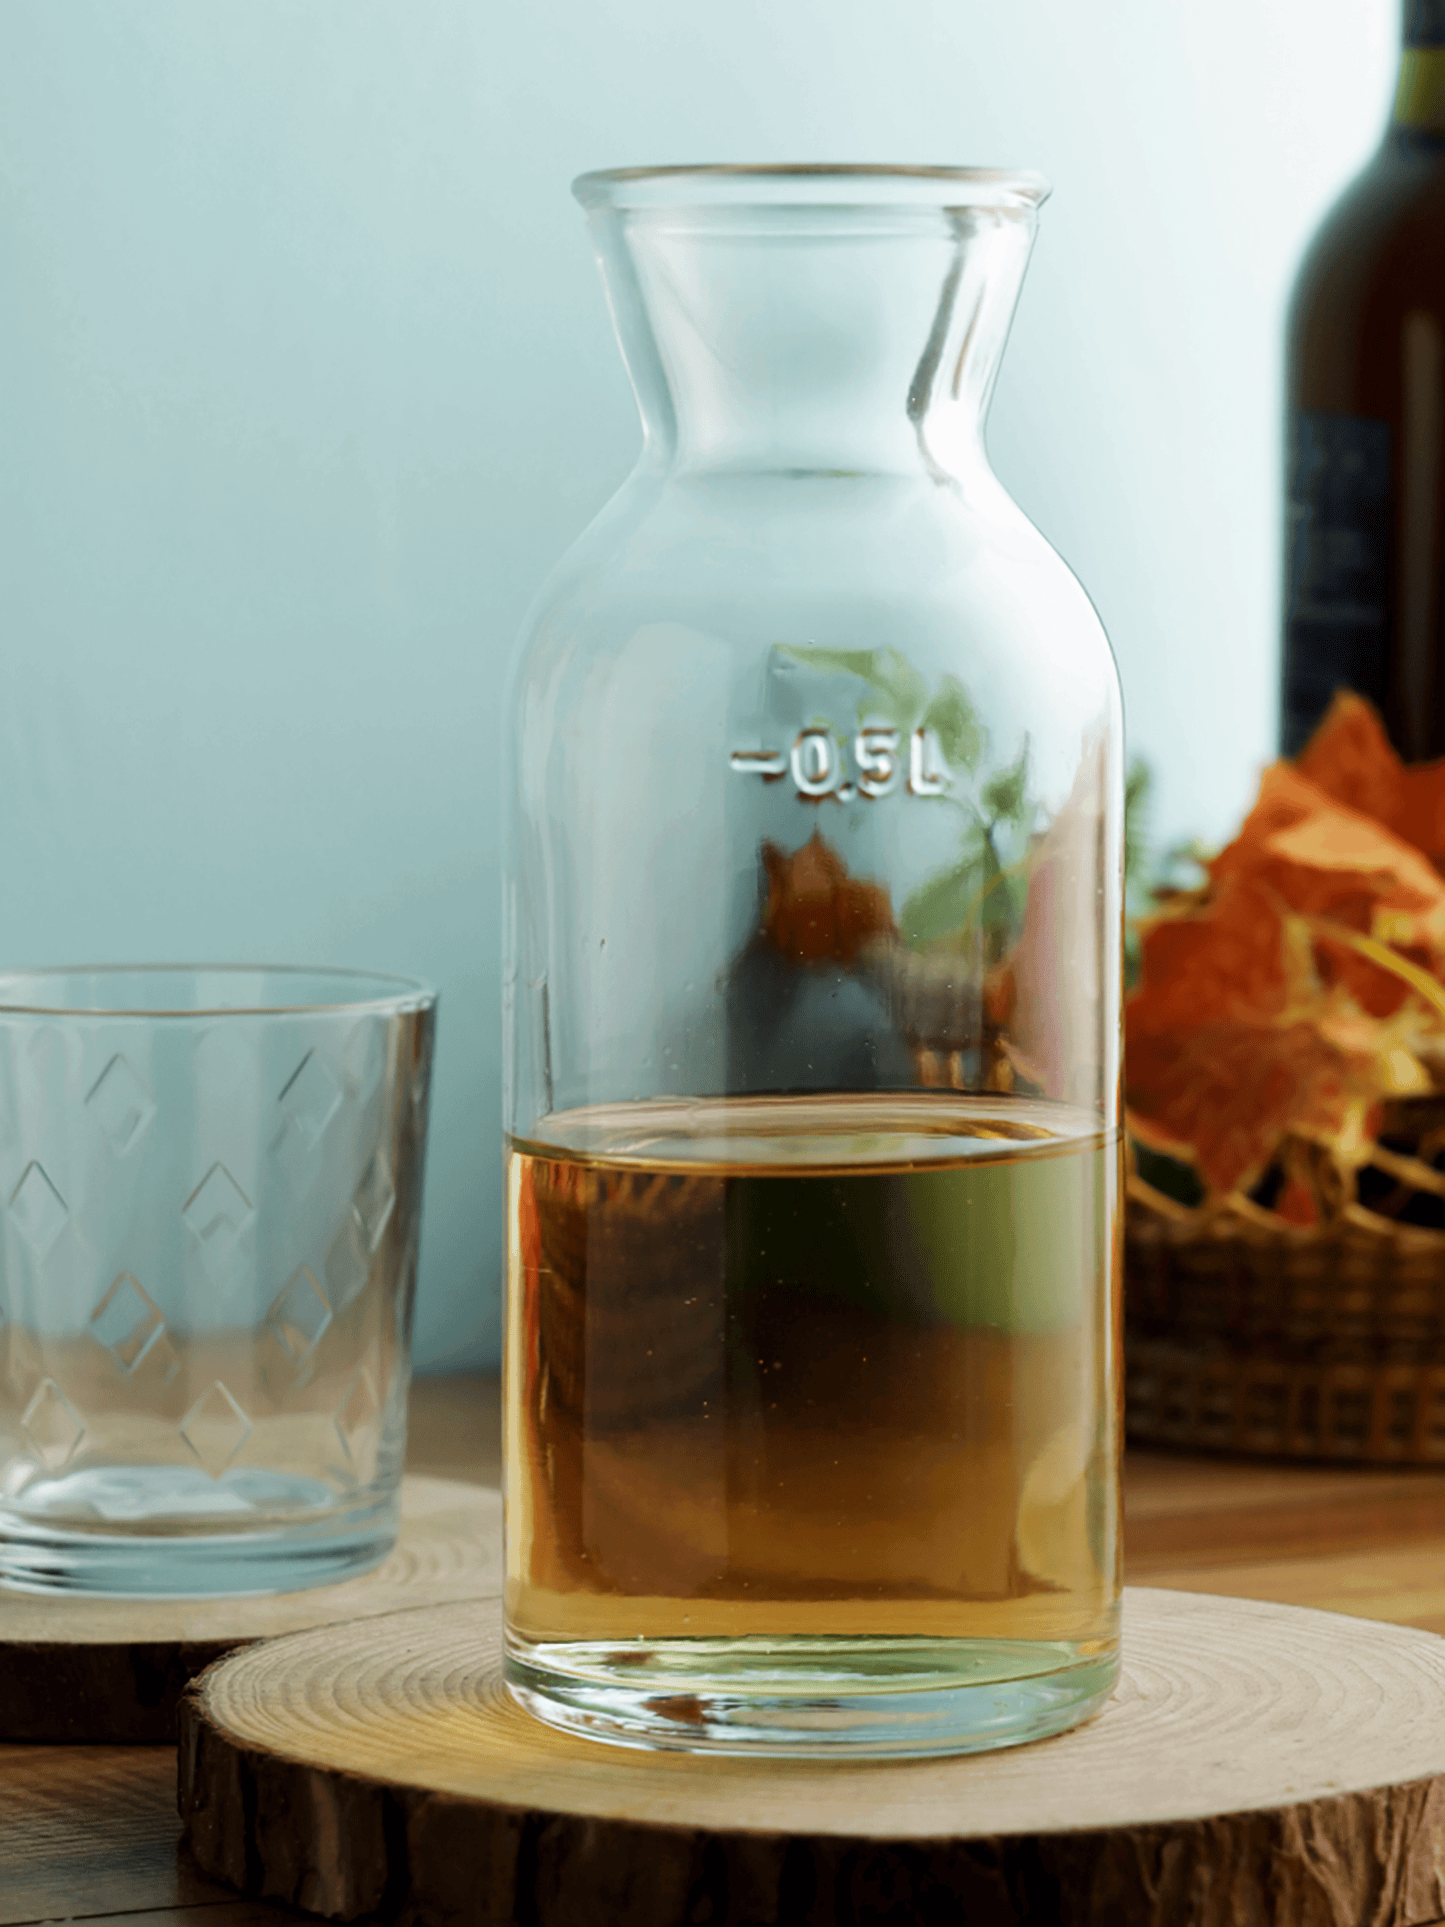 Premium-Quality Glass Decanter - Perfect for enhancing the presentation of drinks.